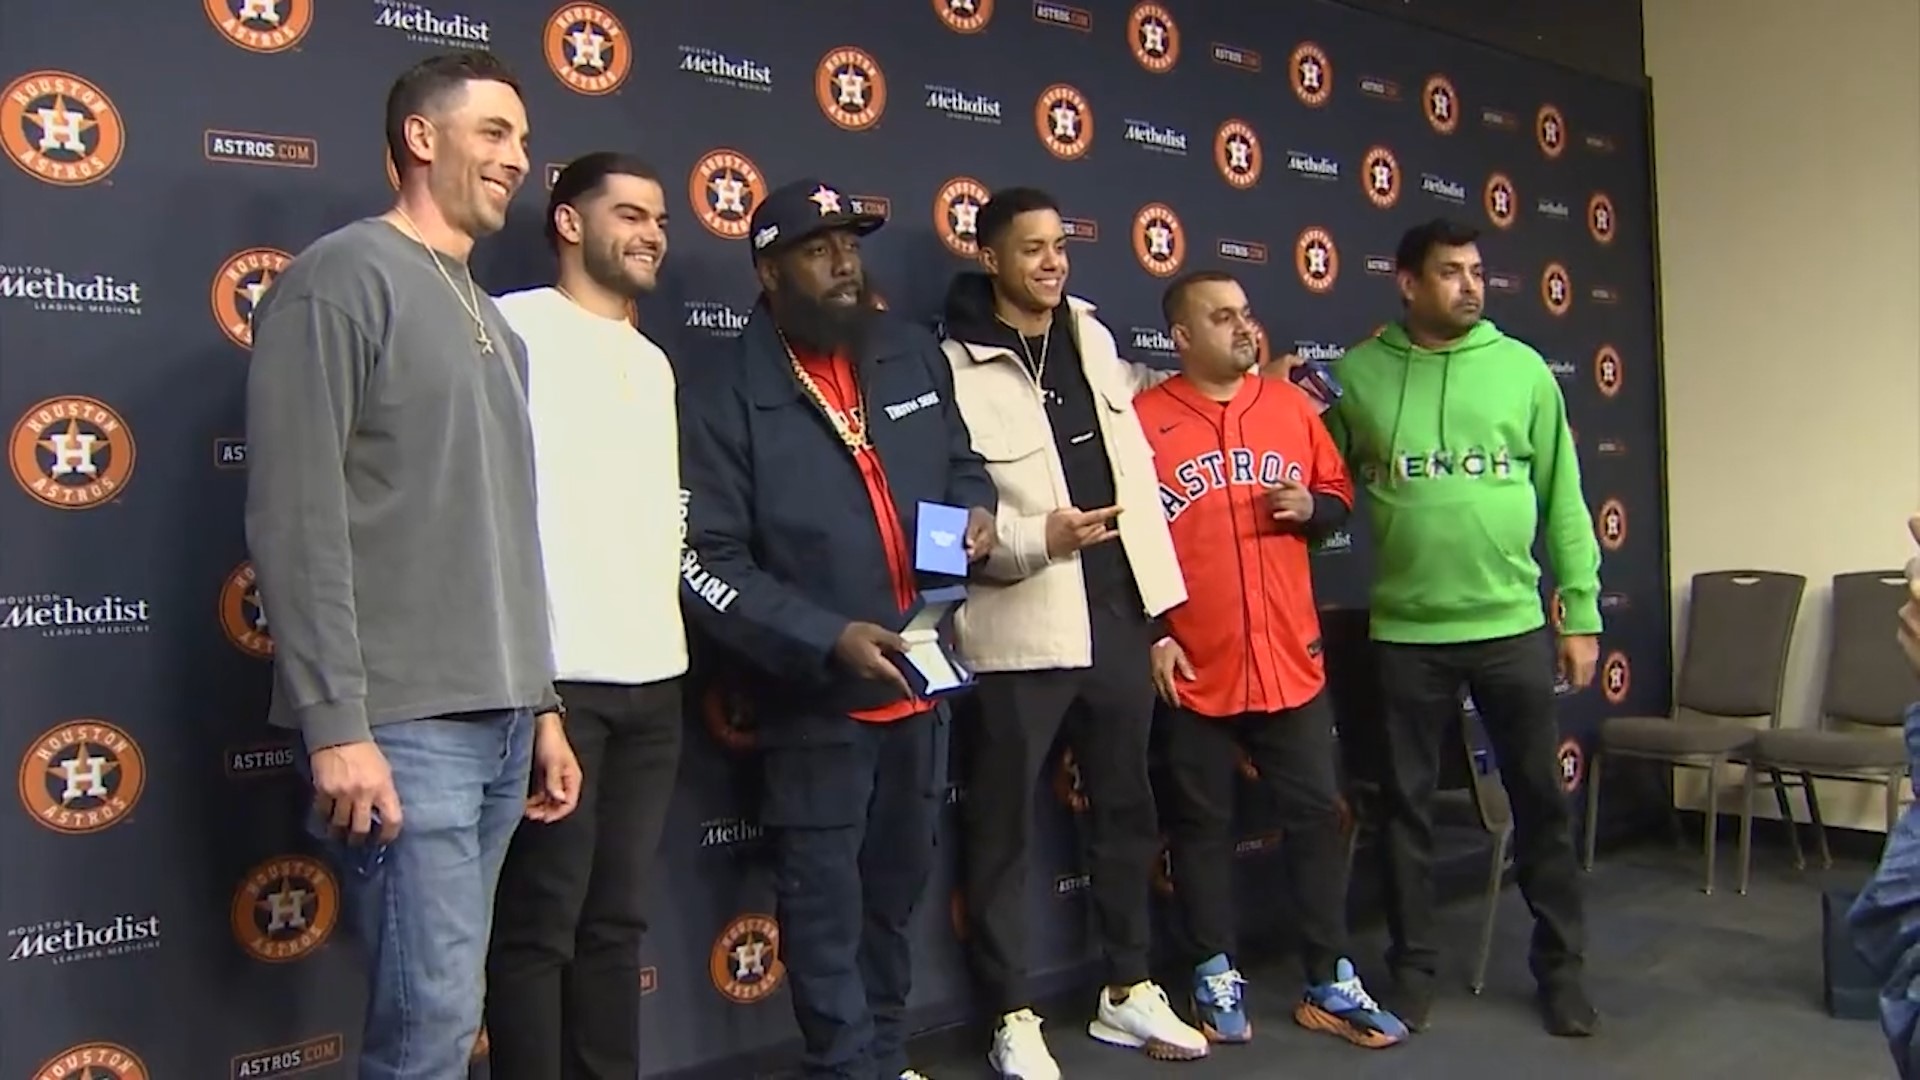 Trae Tha Truth teamed up with Iceman Nick to give out some special diamond pendants with the throwback Astros logo.